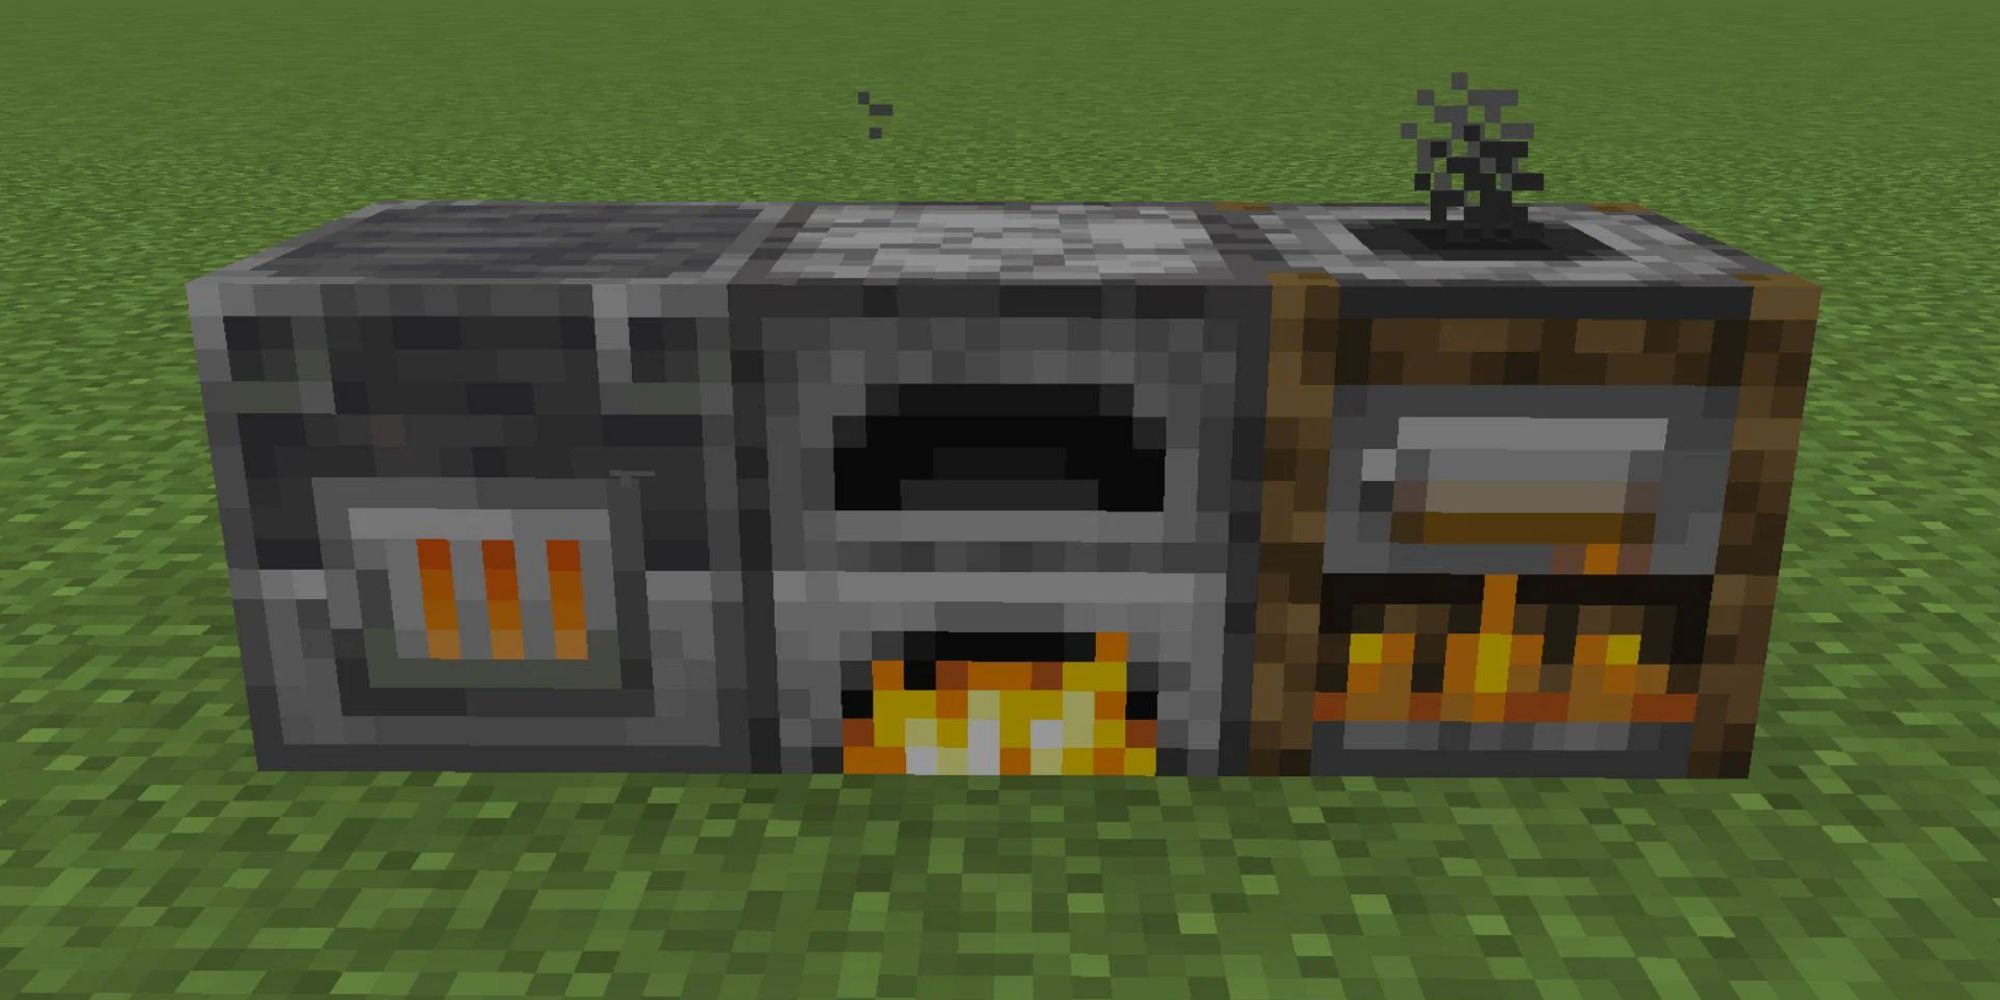 furnace, smelter and blast furnace in minecraft 